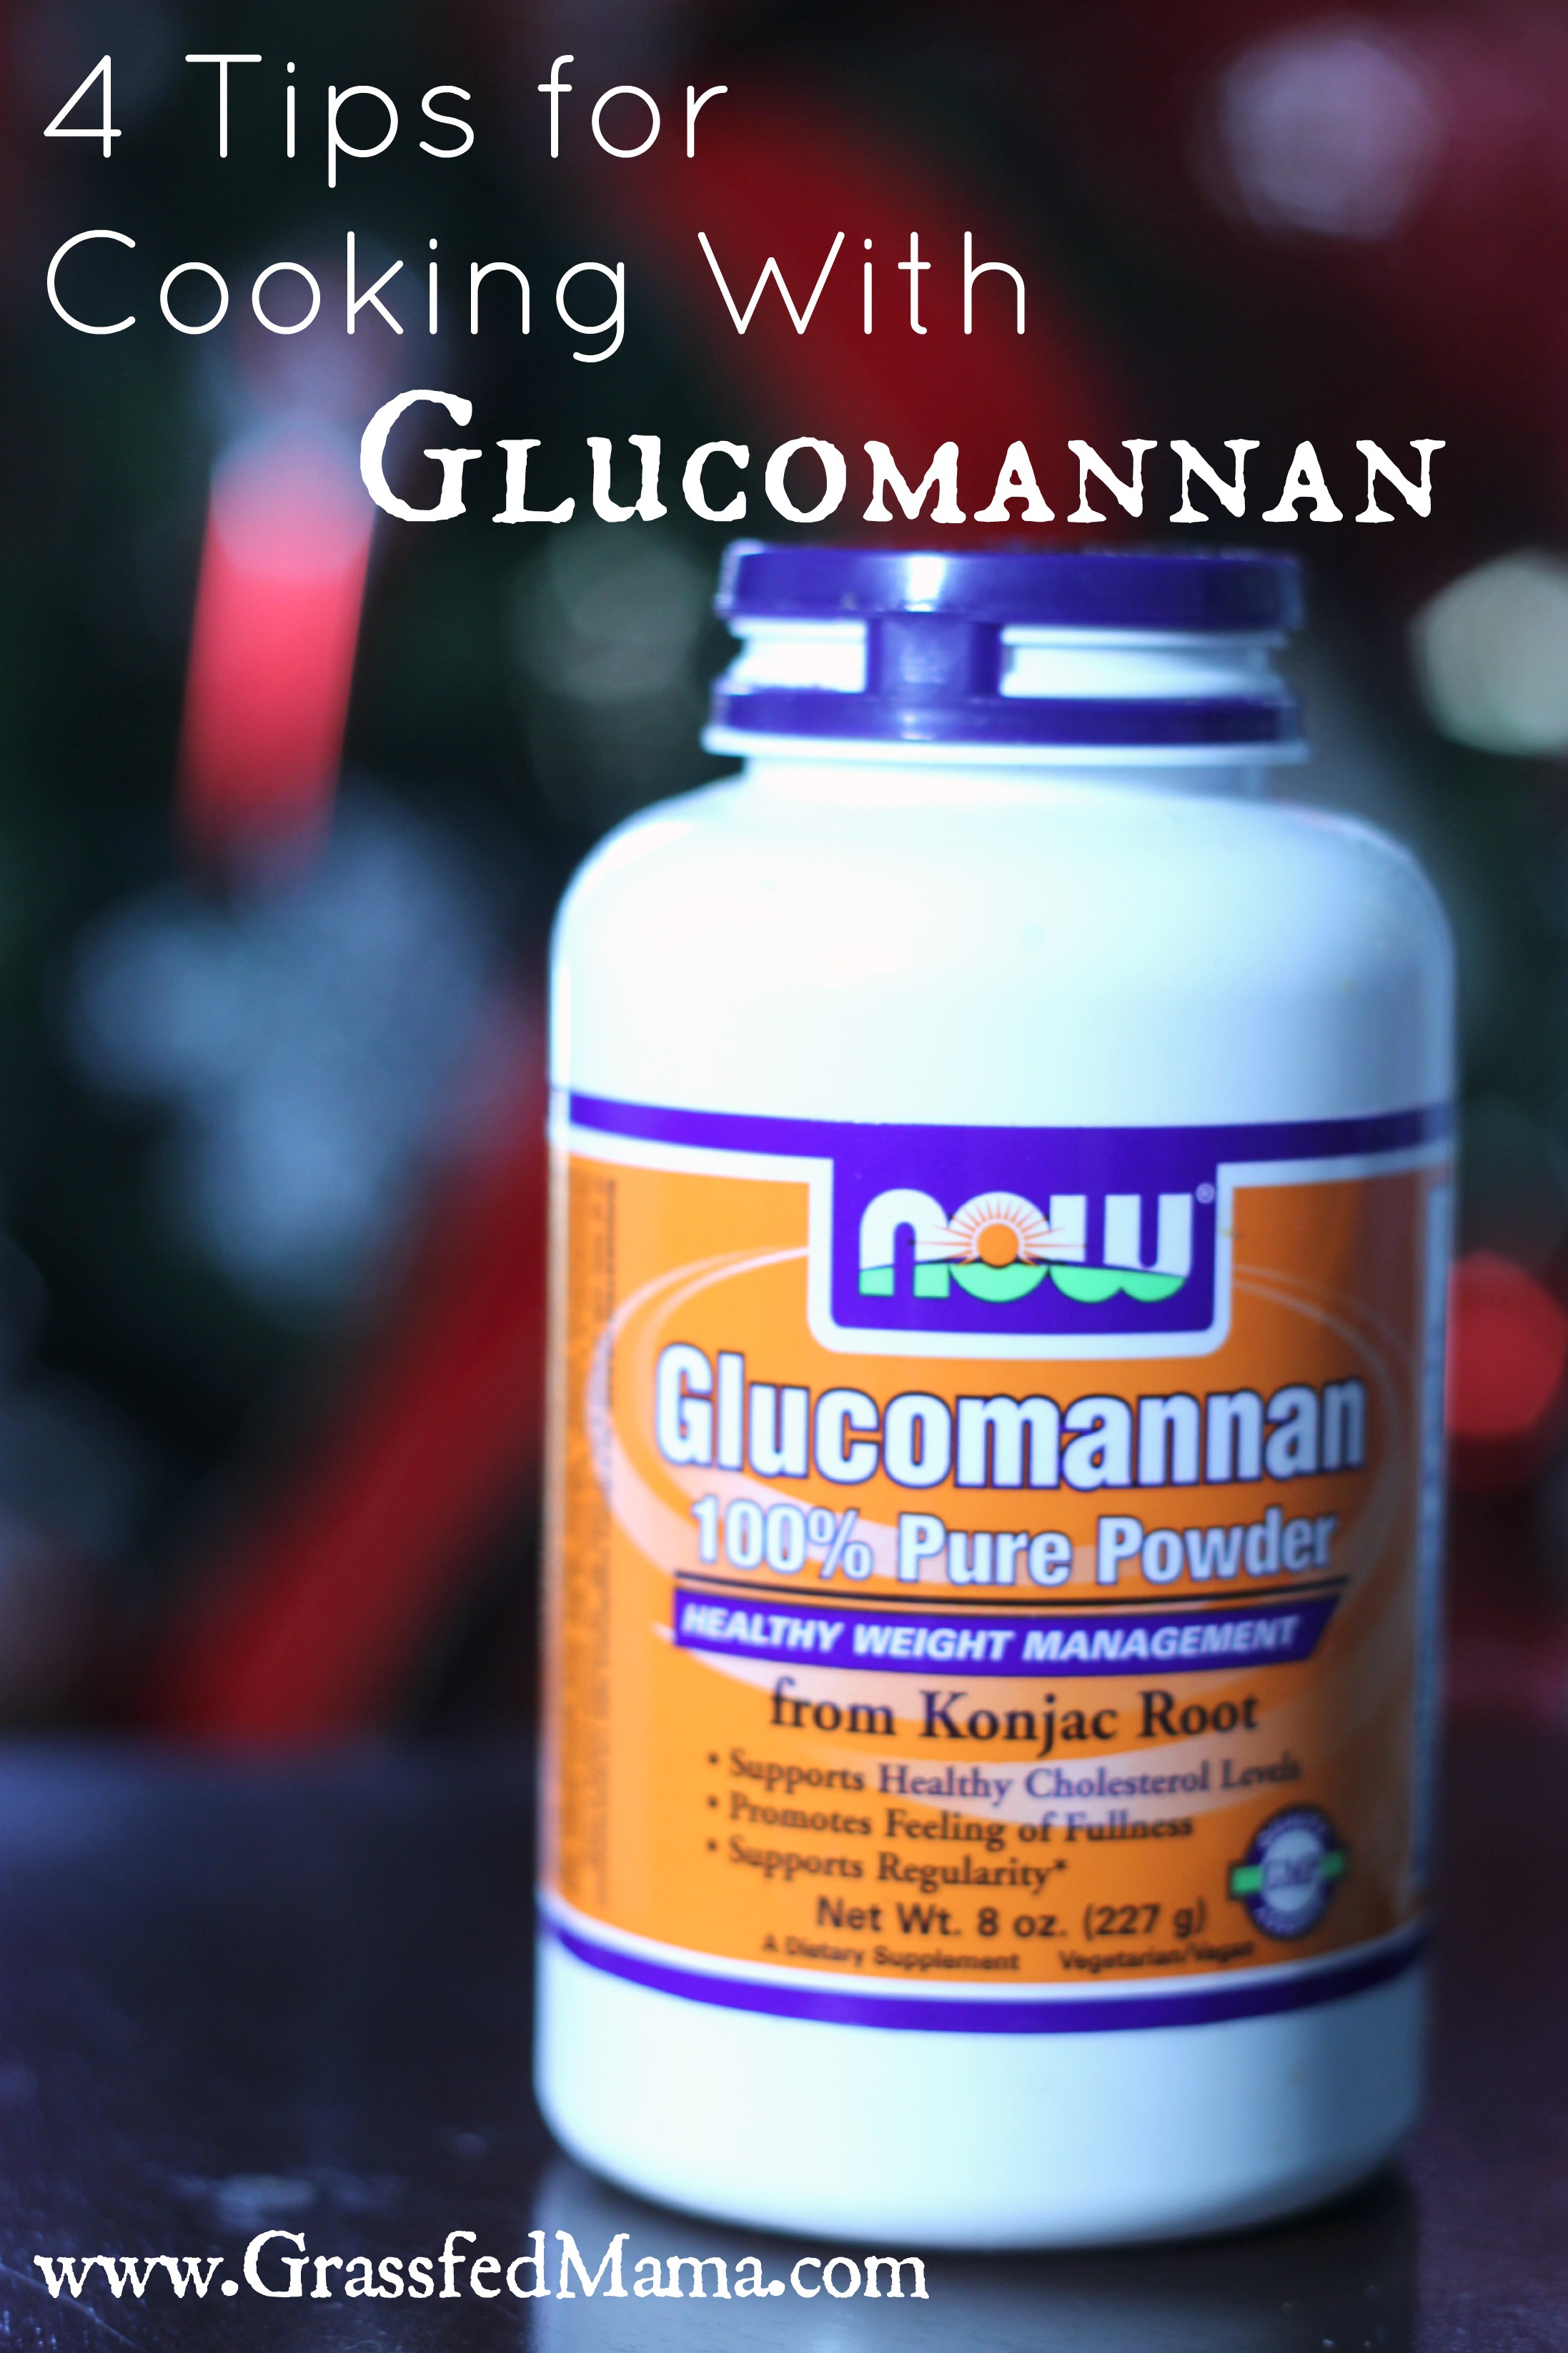 4 Tips for Cooking With Glucomannan